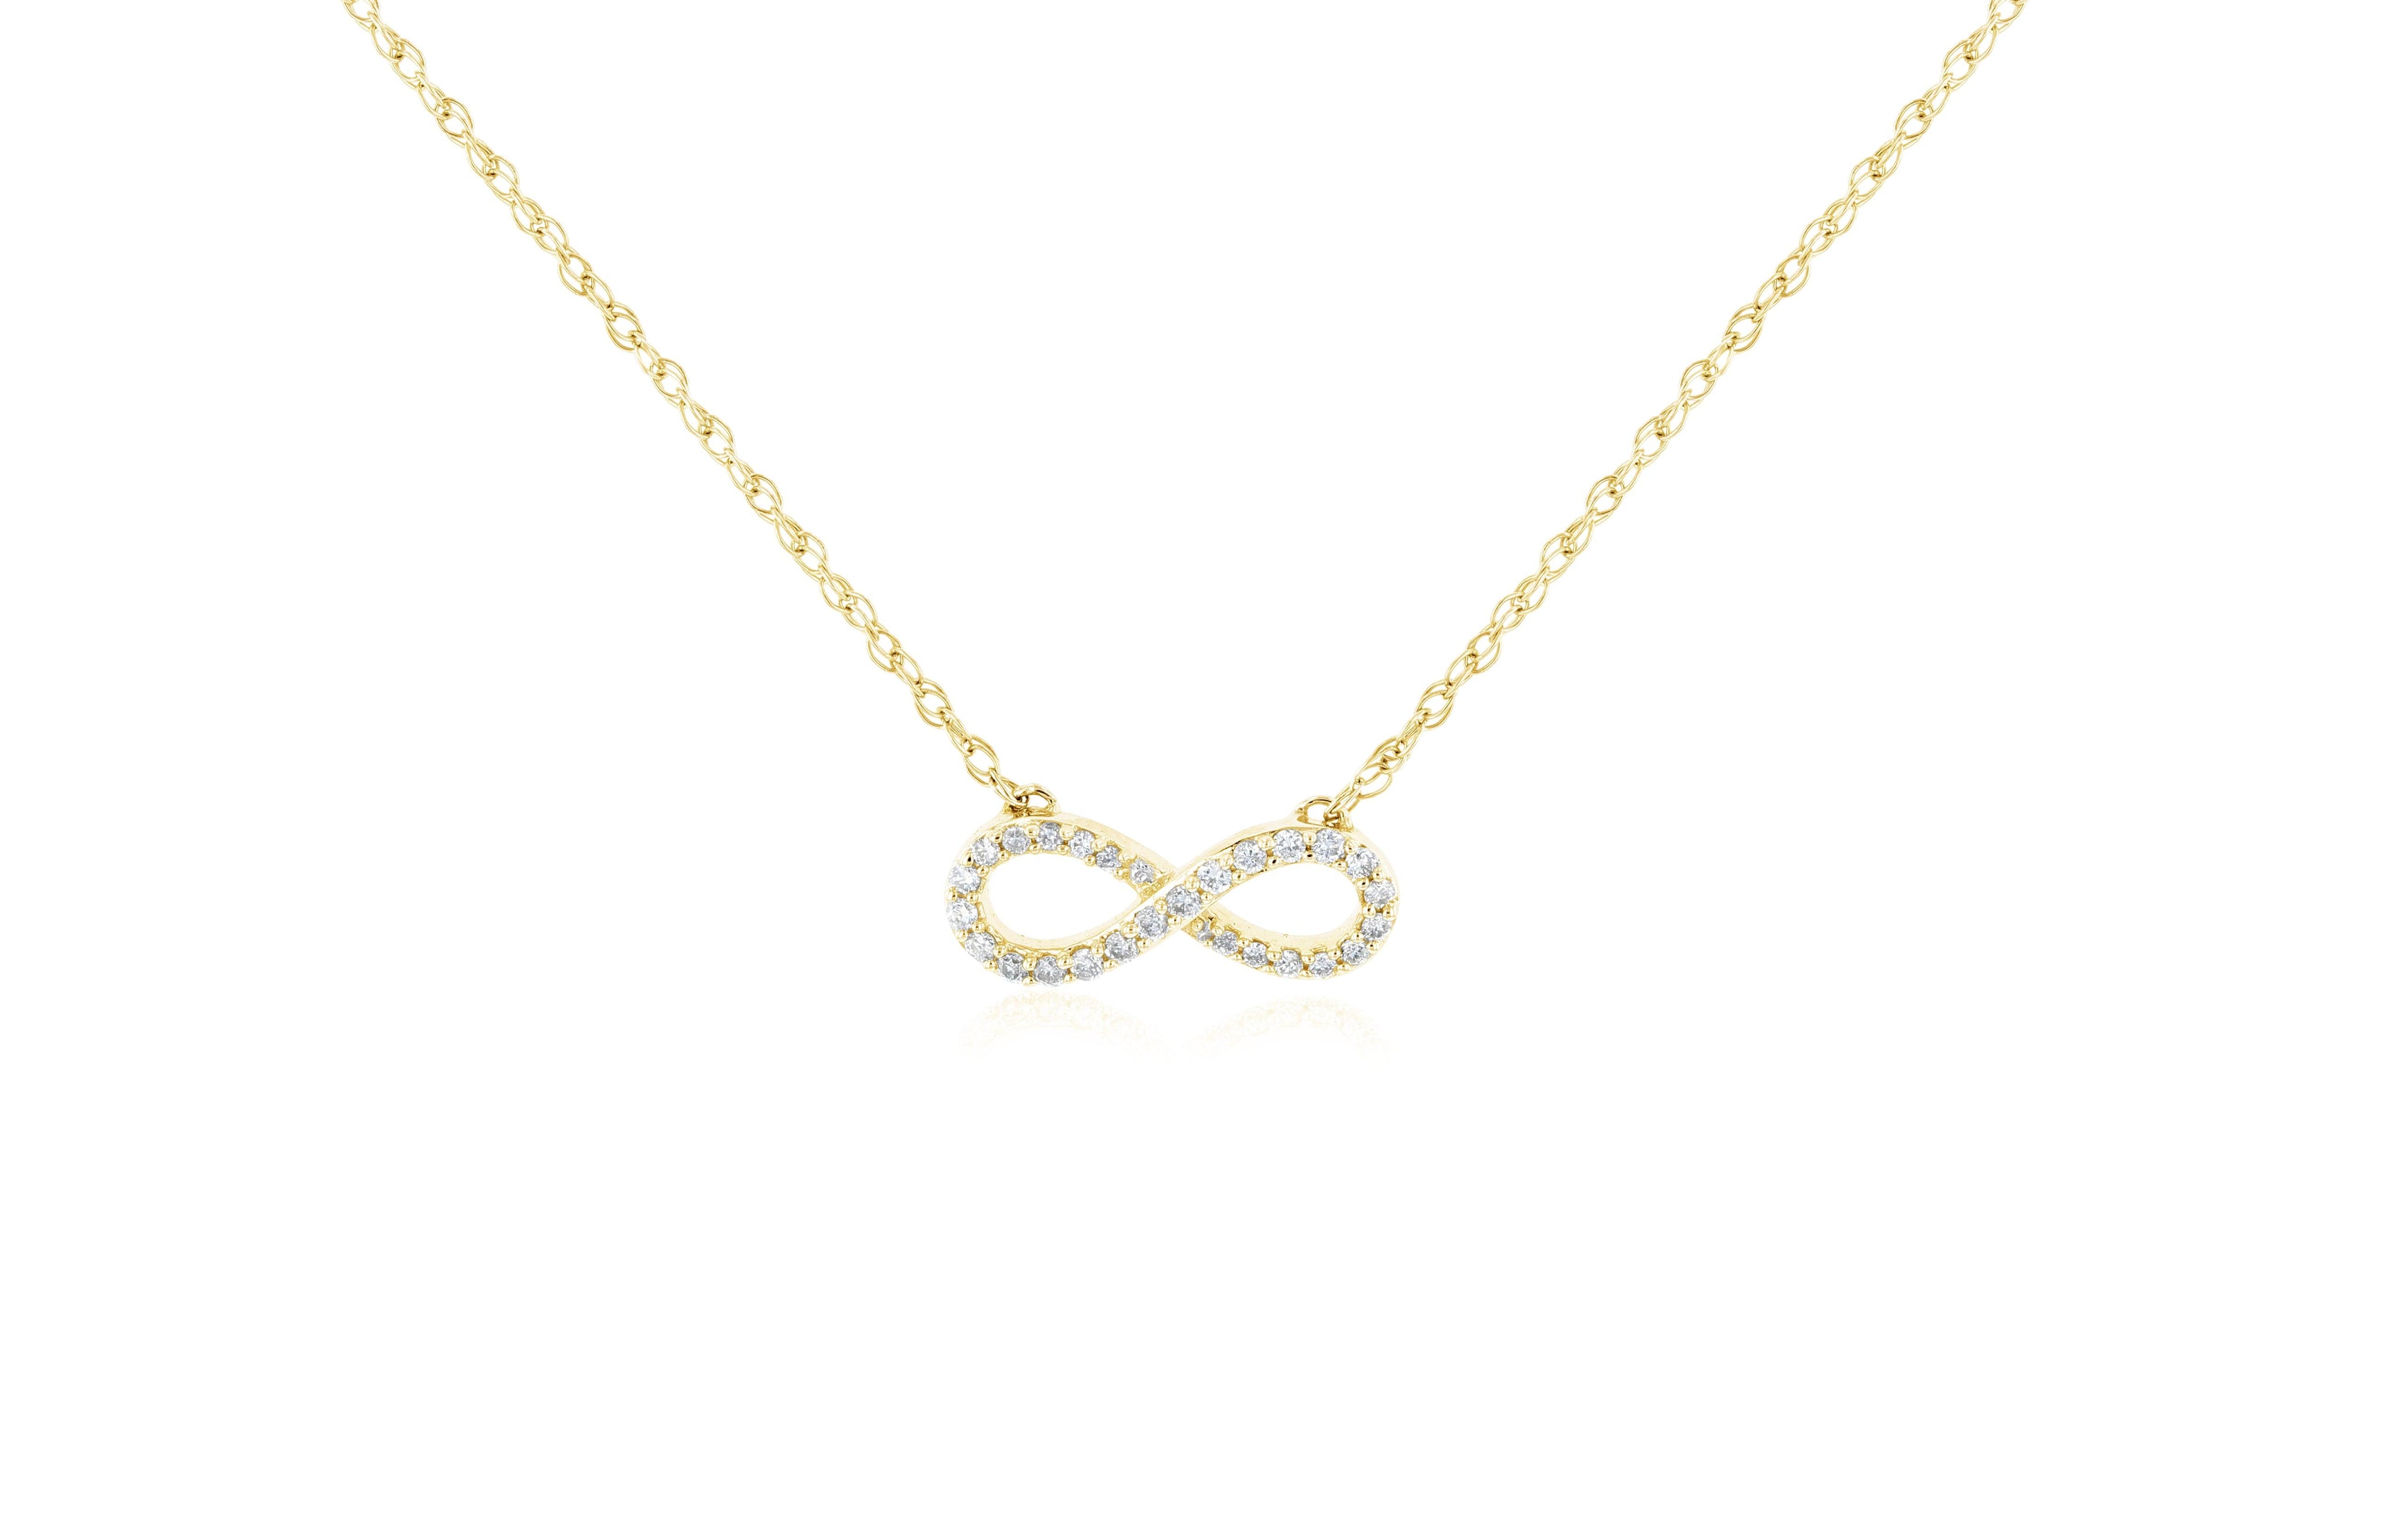 Diamond Infinity Pendant Necklace - The Brothers Jewelry Co.